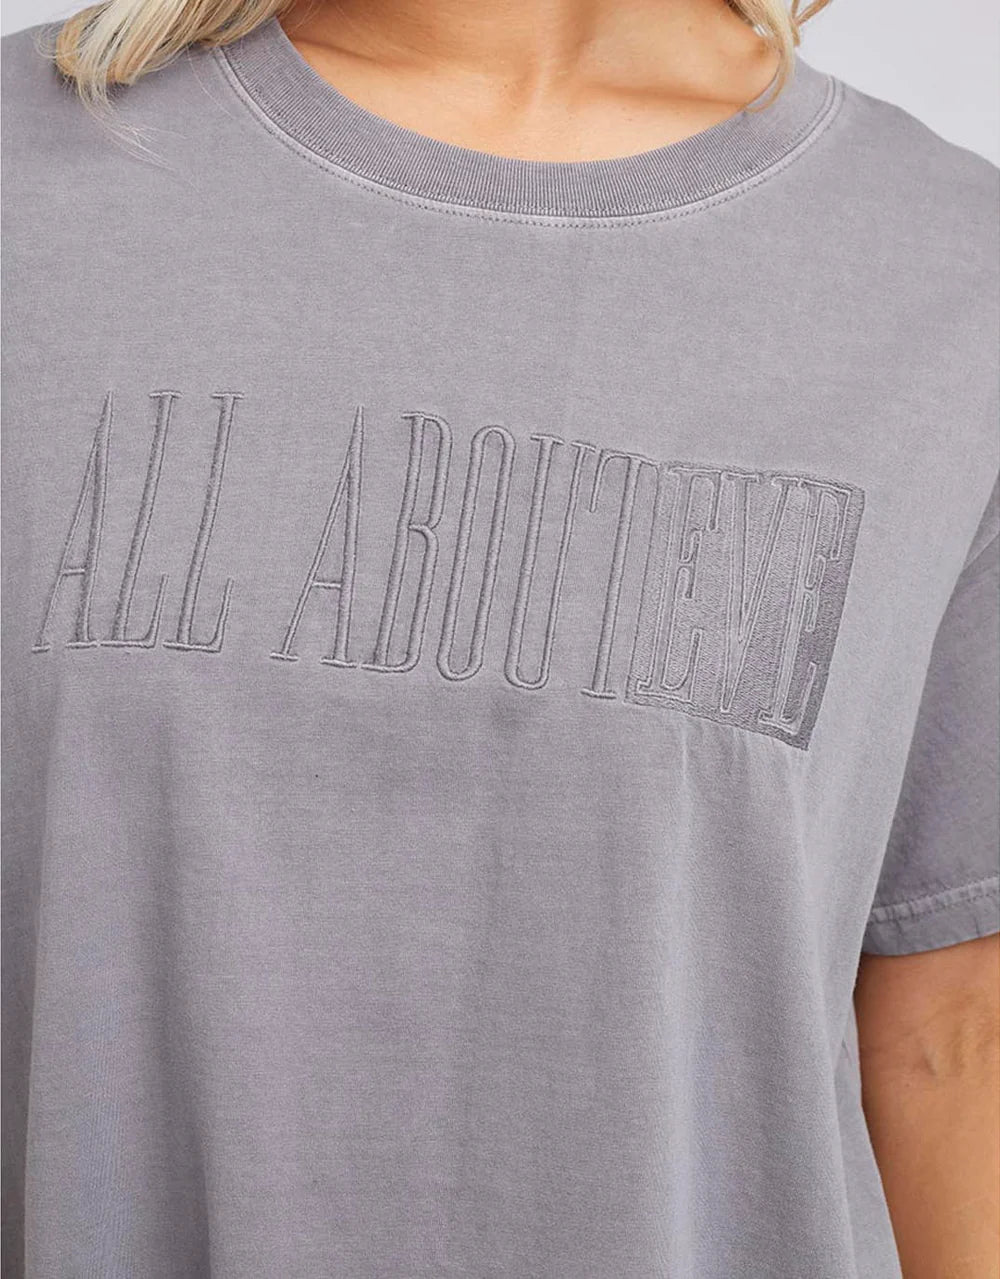 All about eve heritage tee - charcoal